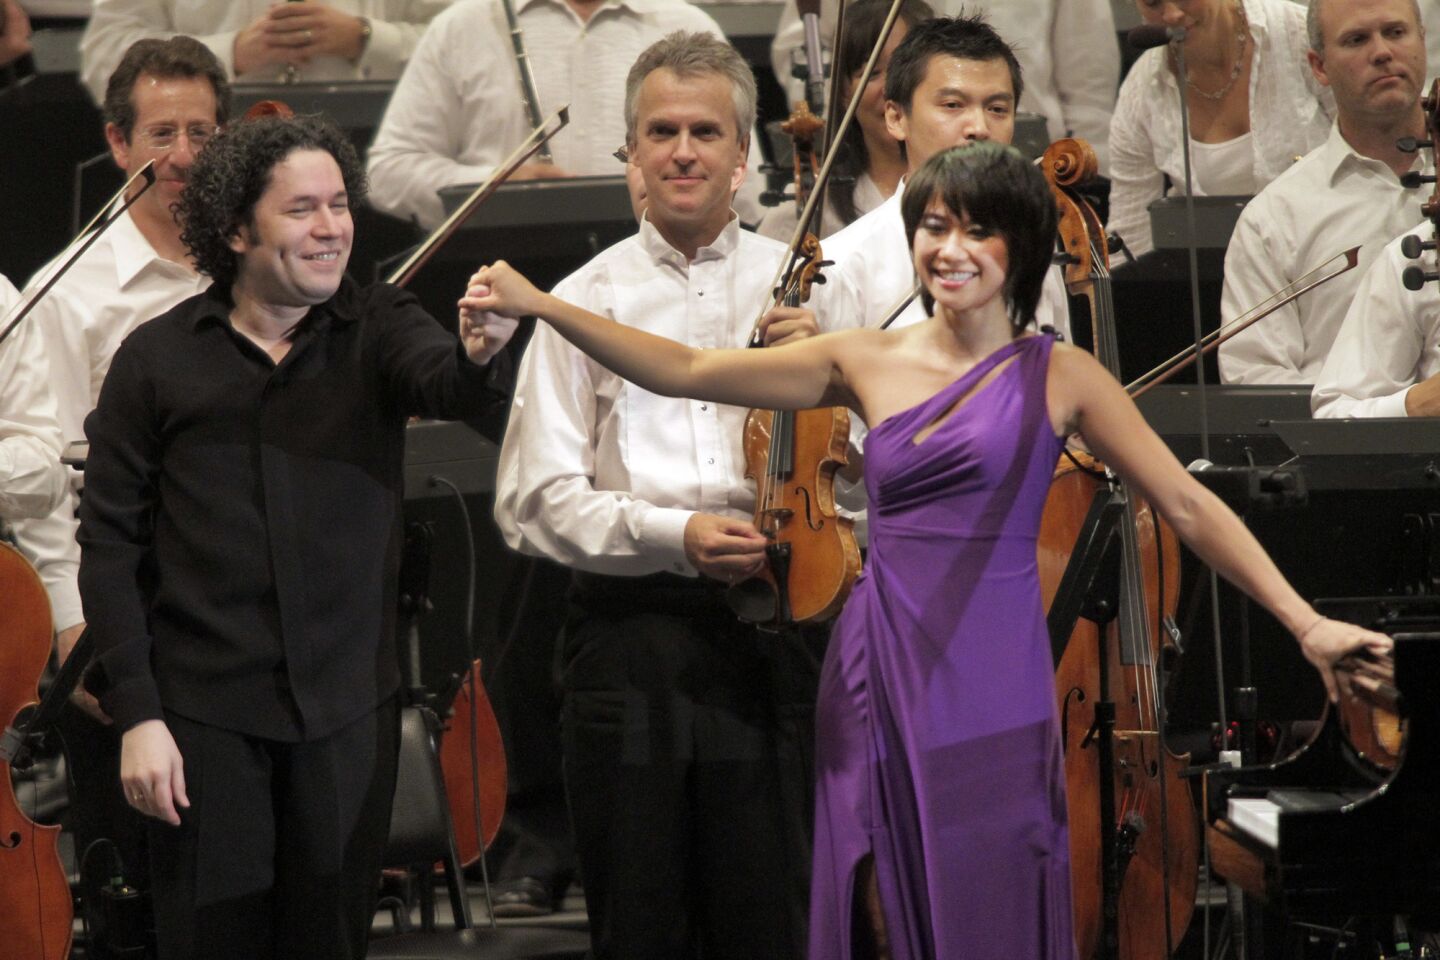 Arts and culture in pictures by The Times | Gustavo Dudamel and Yuja Wang at the Bowl